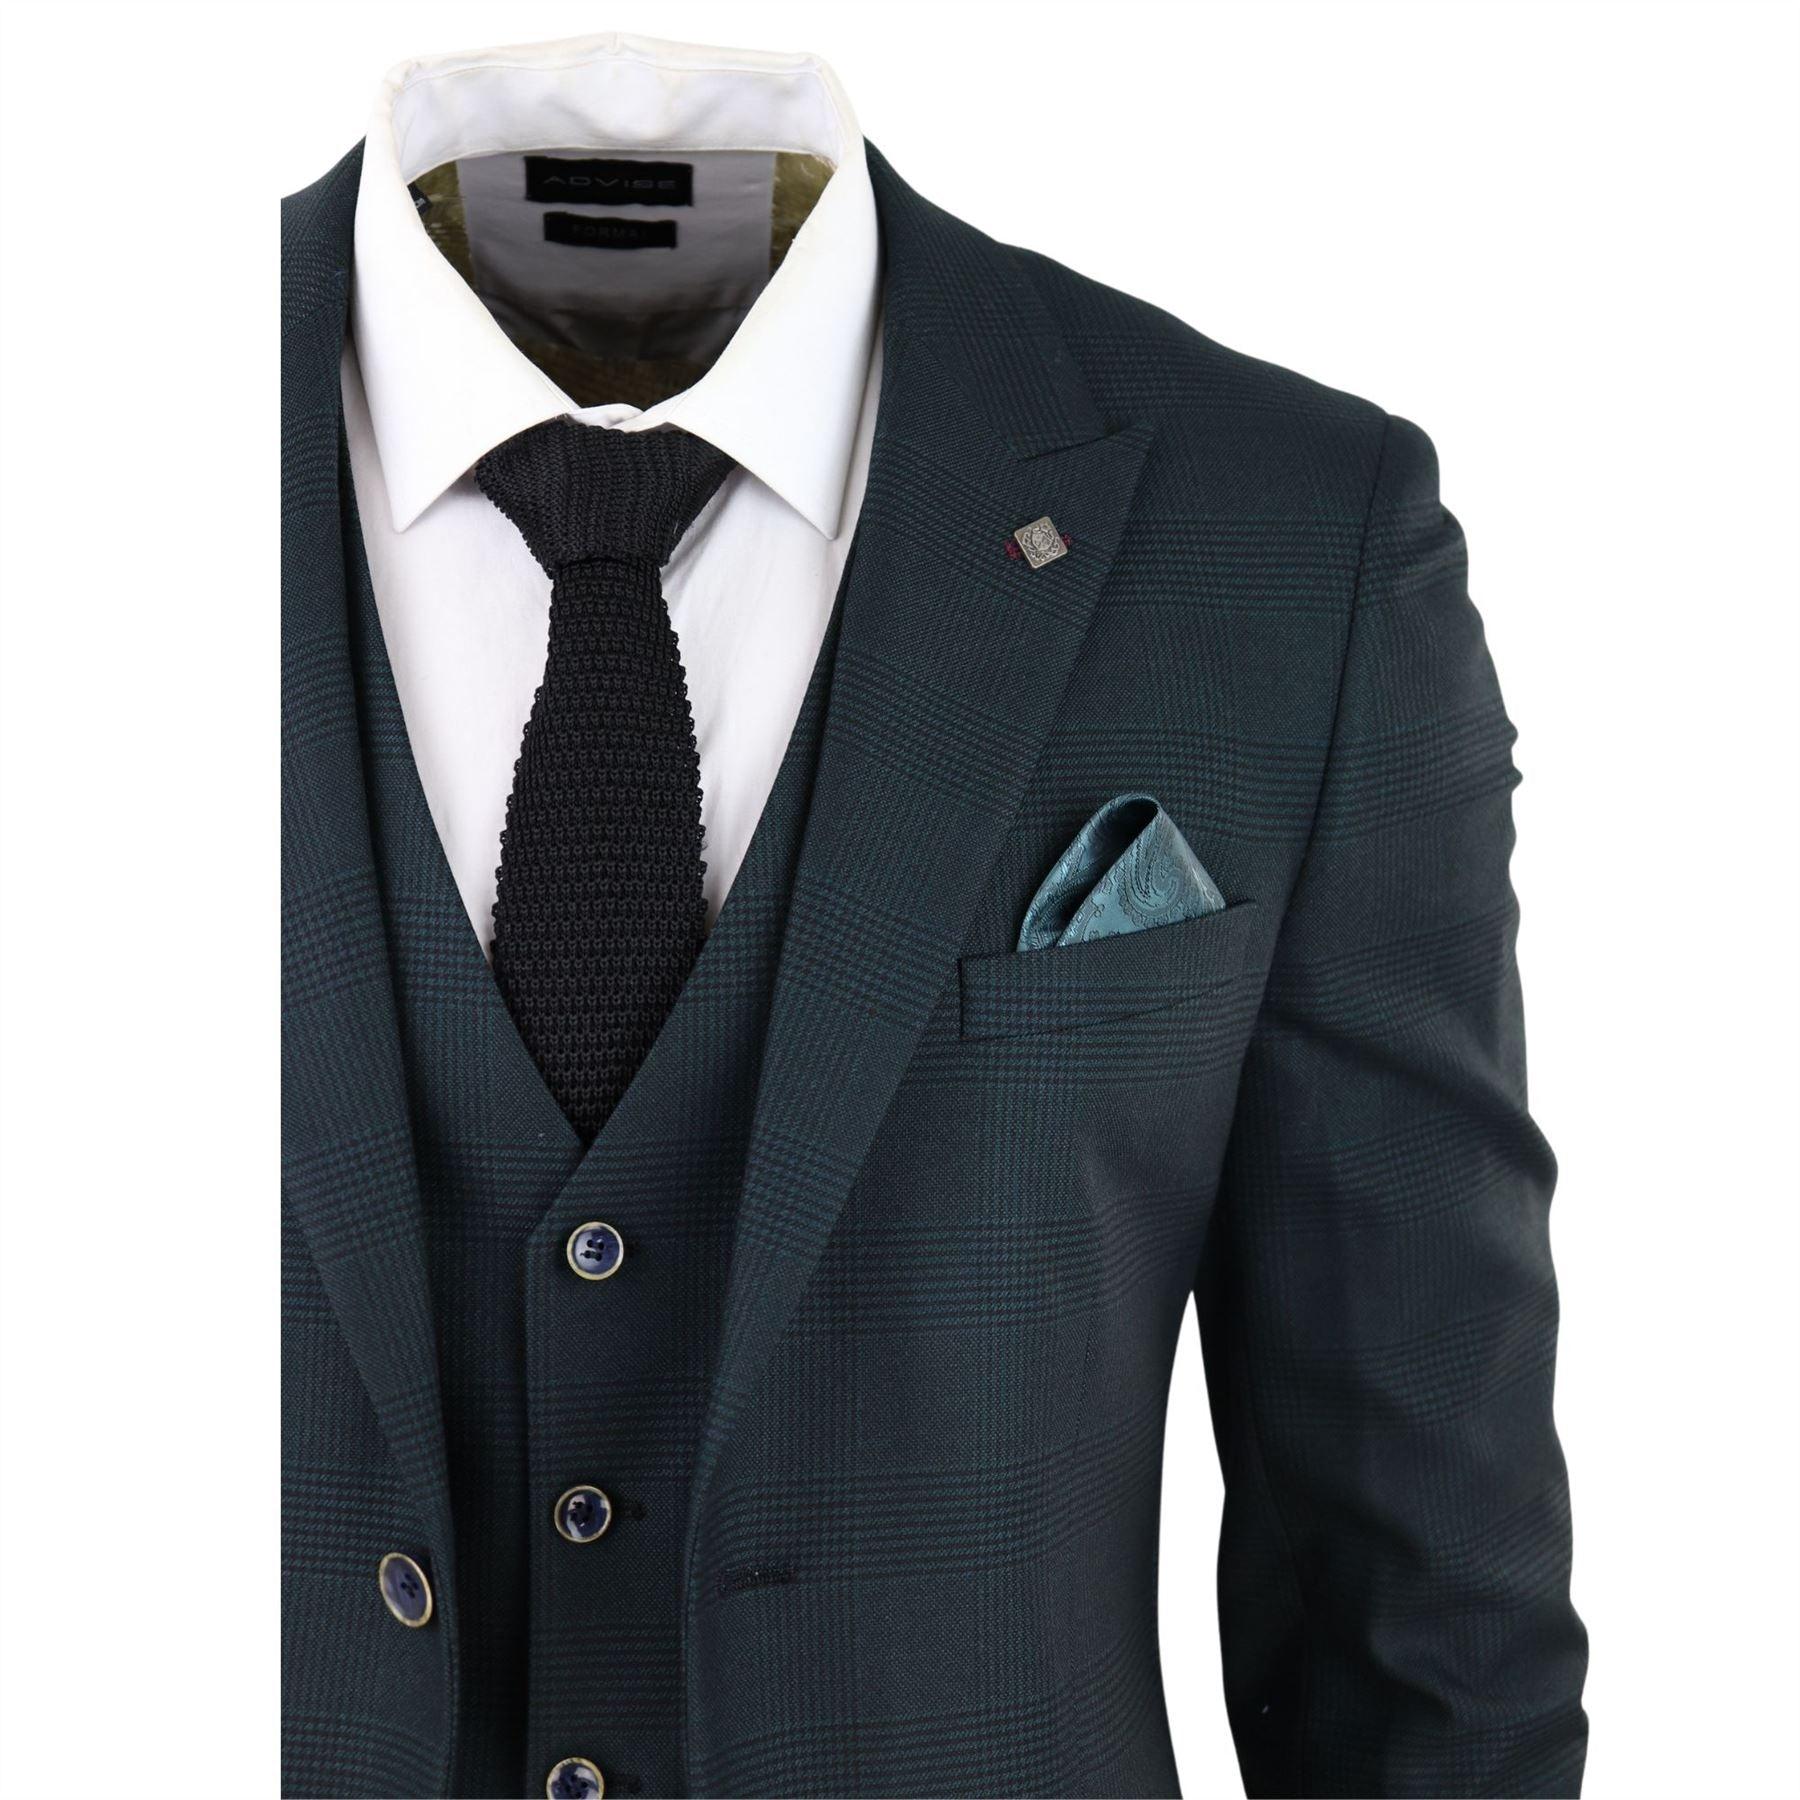 Mens Olive Green 3 Piece Suit Prince Of Wales Black Check Classic Tailored Fit - Knighthood Store